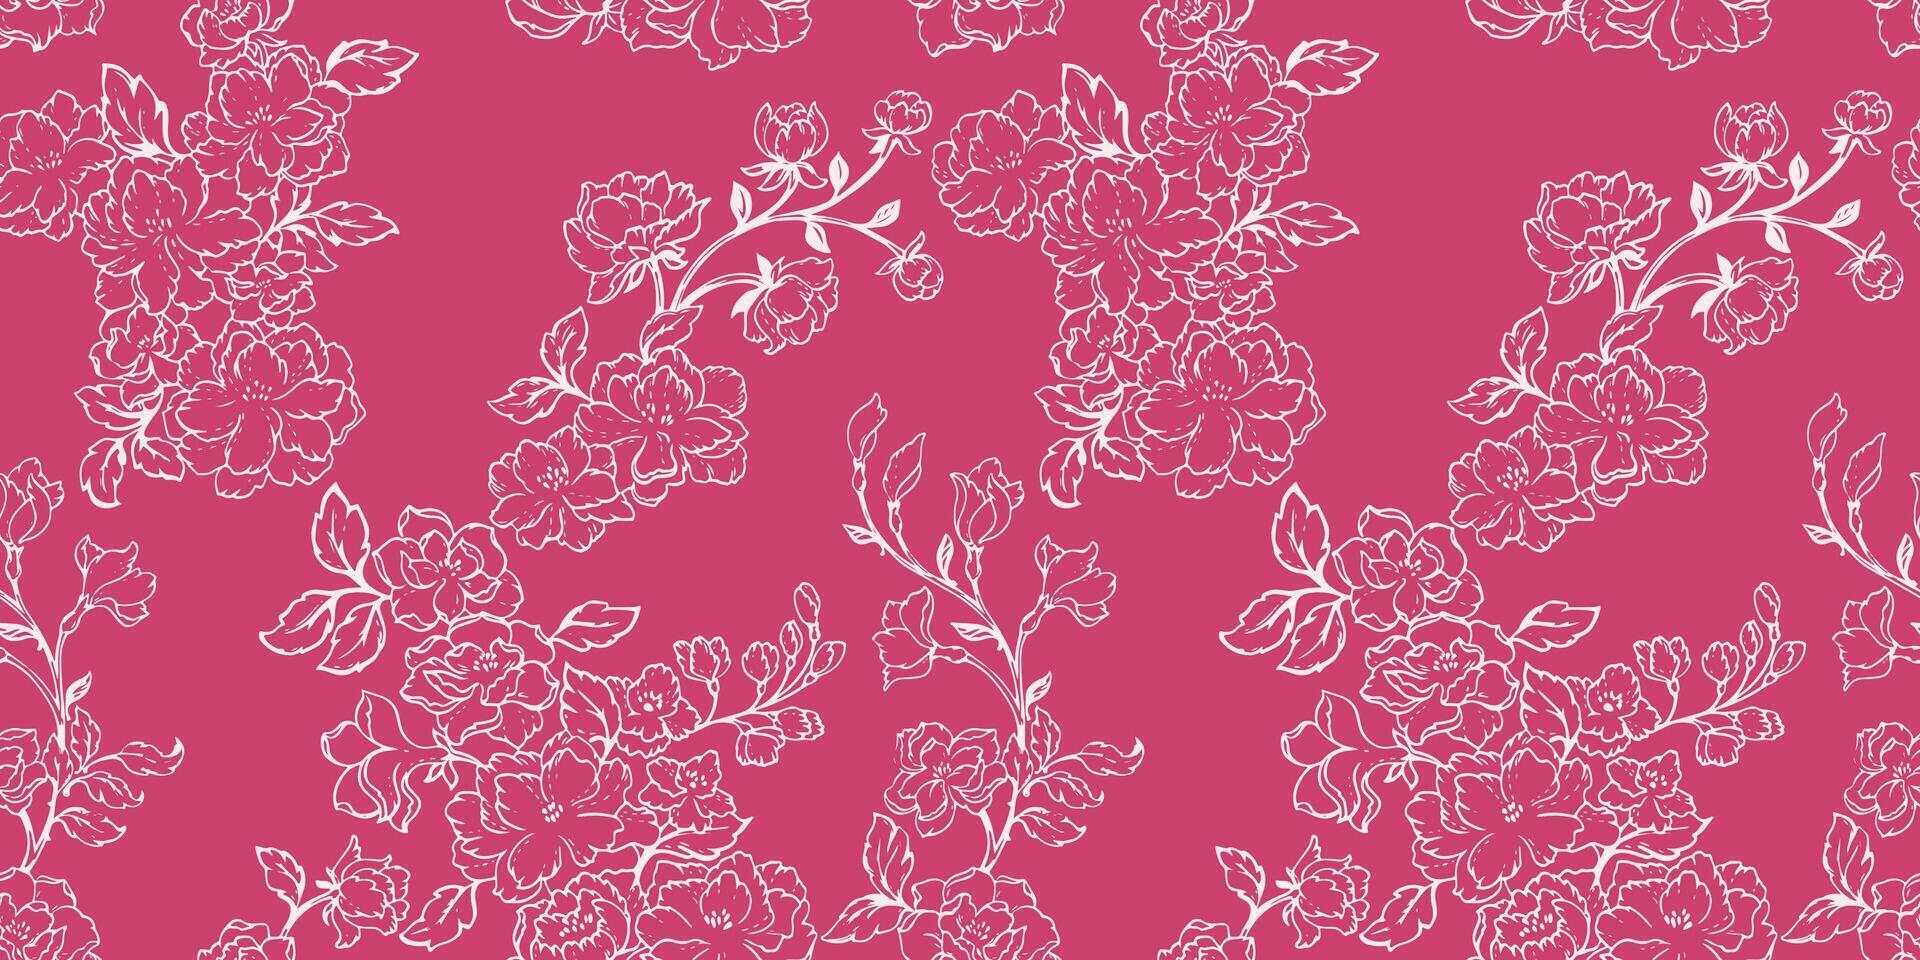 Seamless abstract, artistic, lines floral pattern. Vector hand drawn sketch outlines flowers.  Template for textile, fashion, print, surface design, fabric, indoor decor, wallpaper